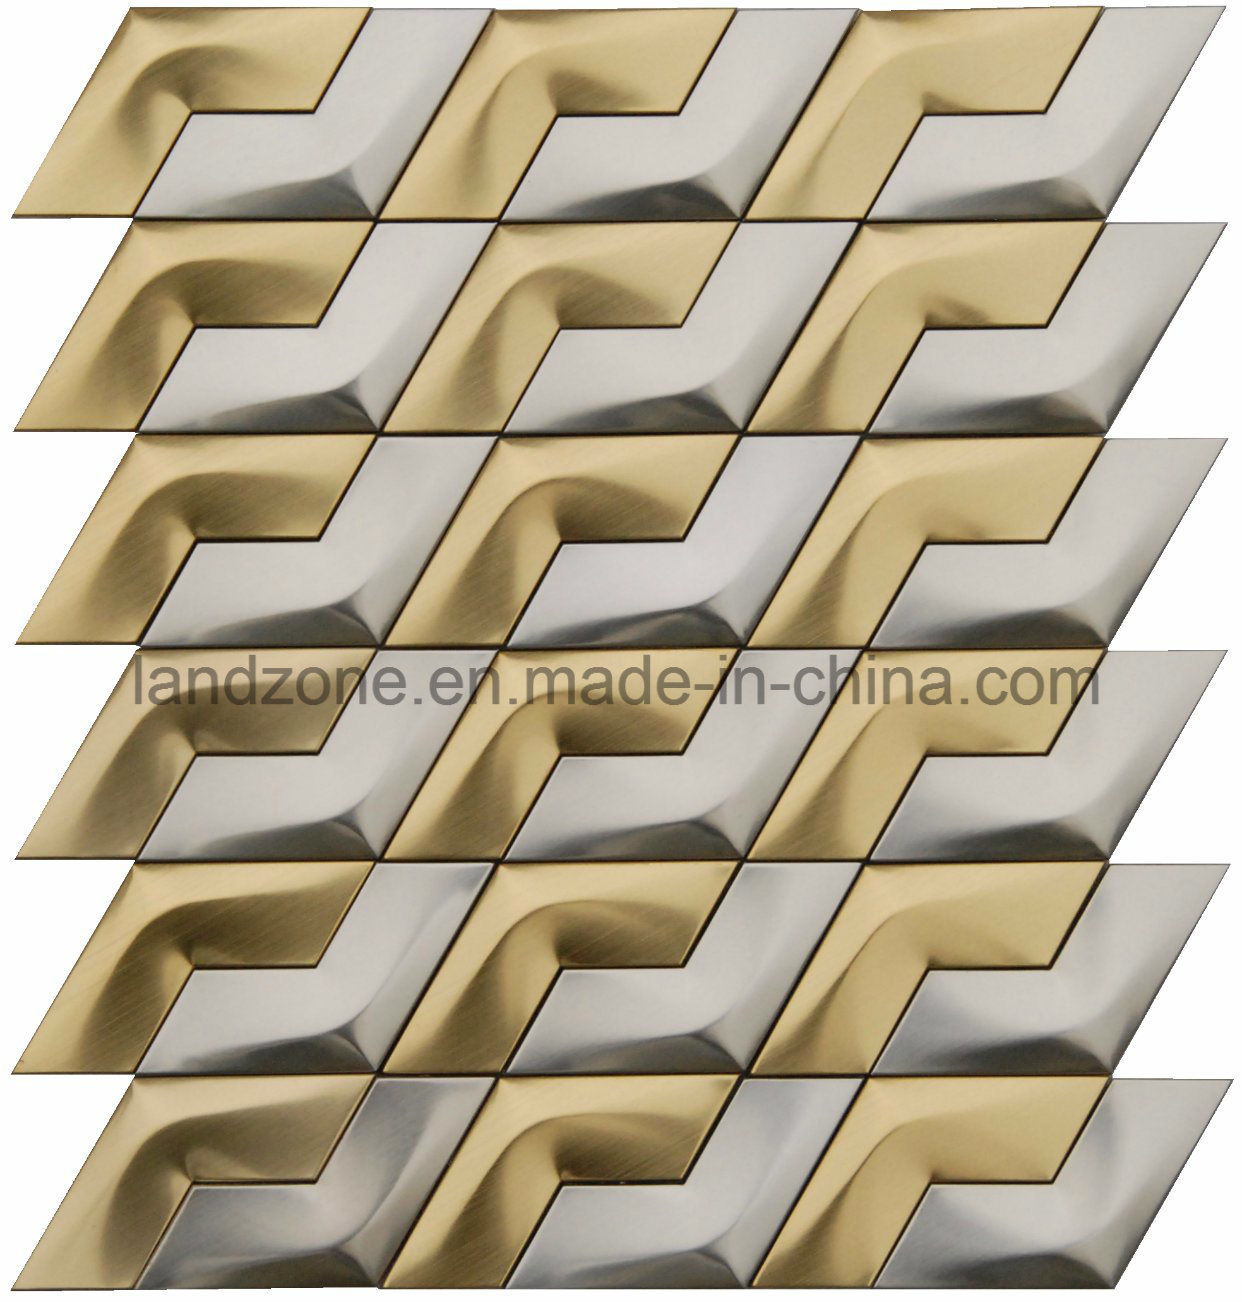 Golden Color of S304 Stainless Steel Mosaic Tile